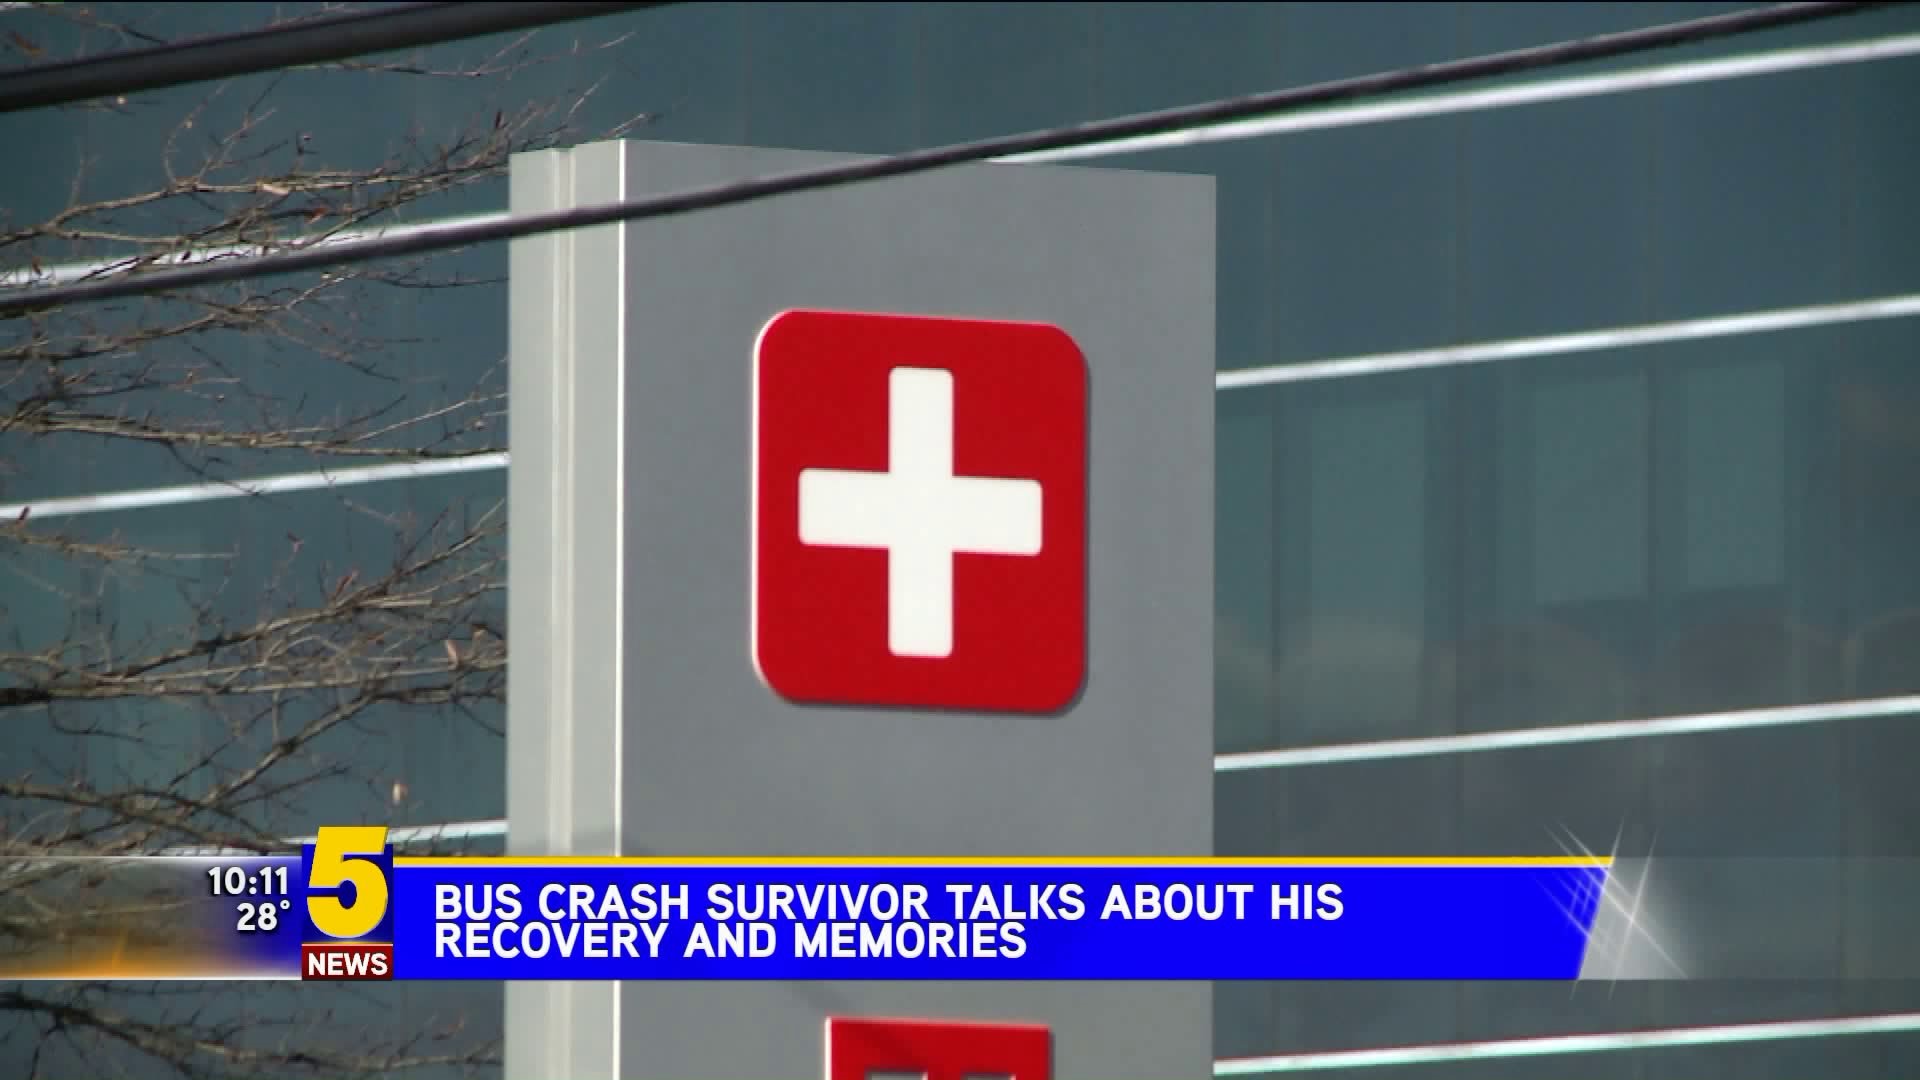 Bus Crash Survivor Talks About His Recovery and Memories